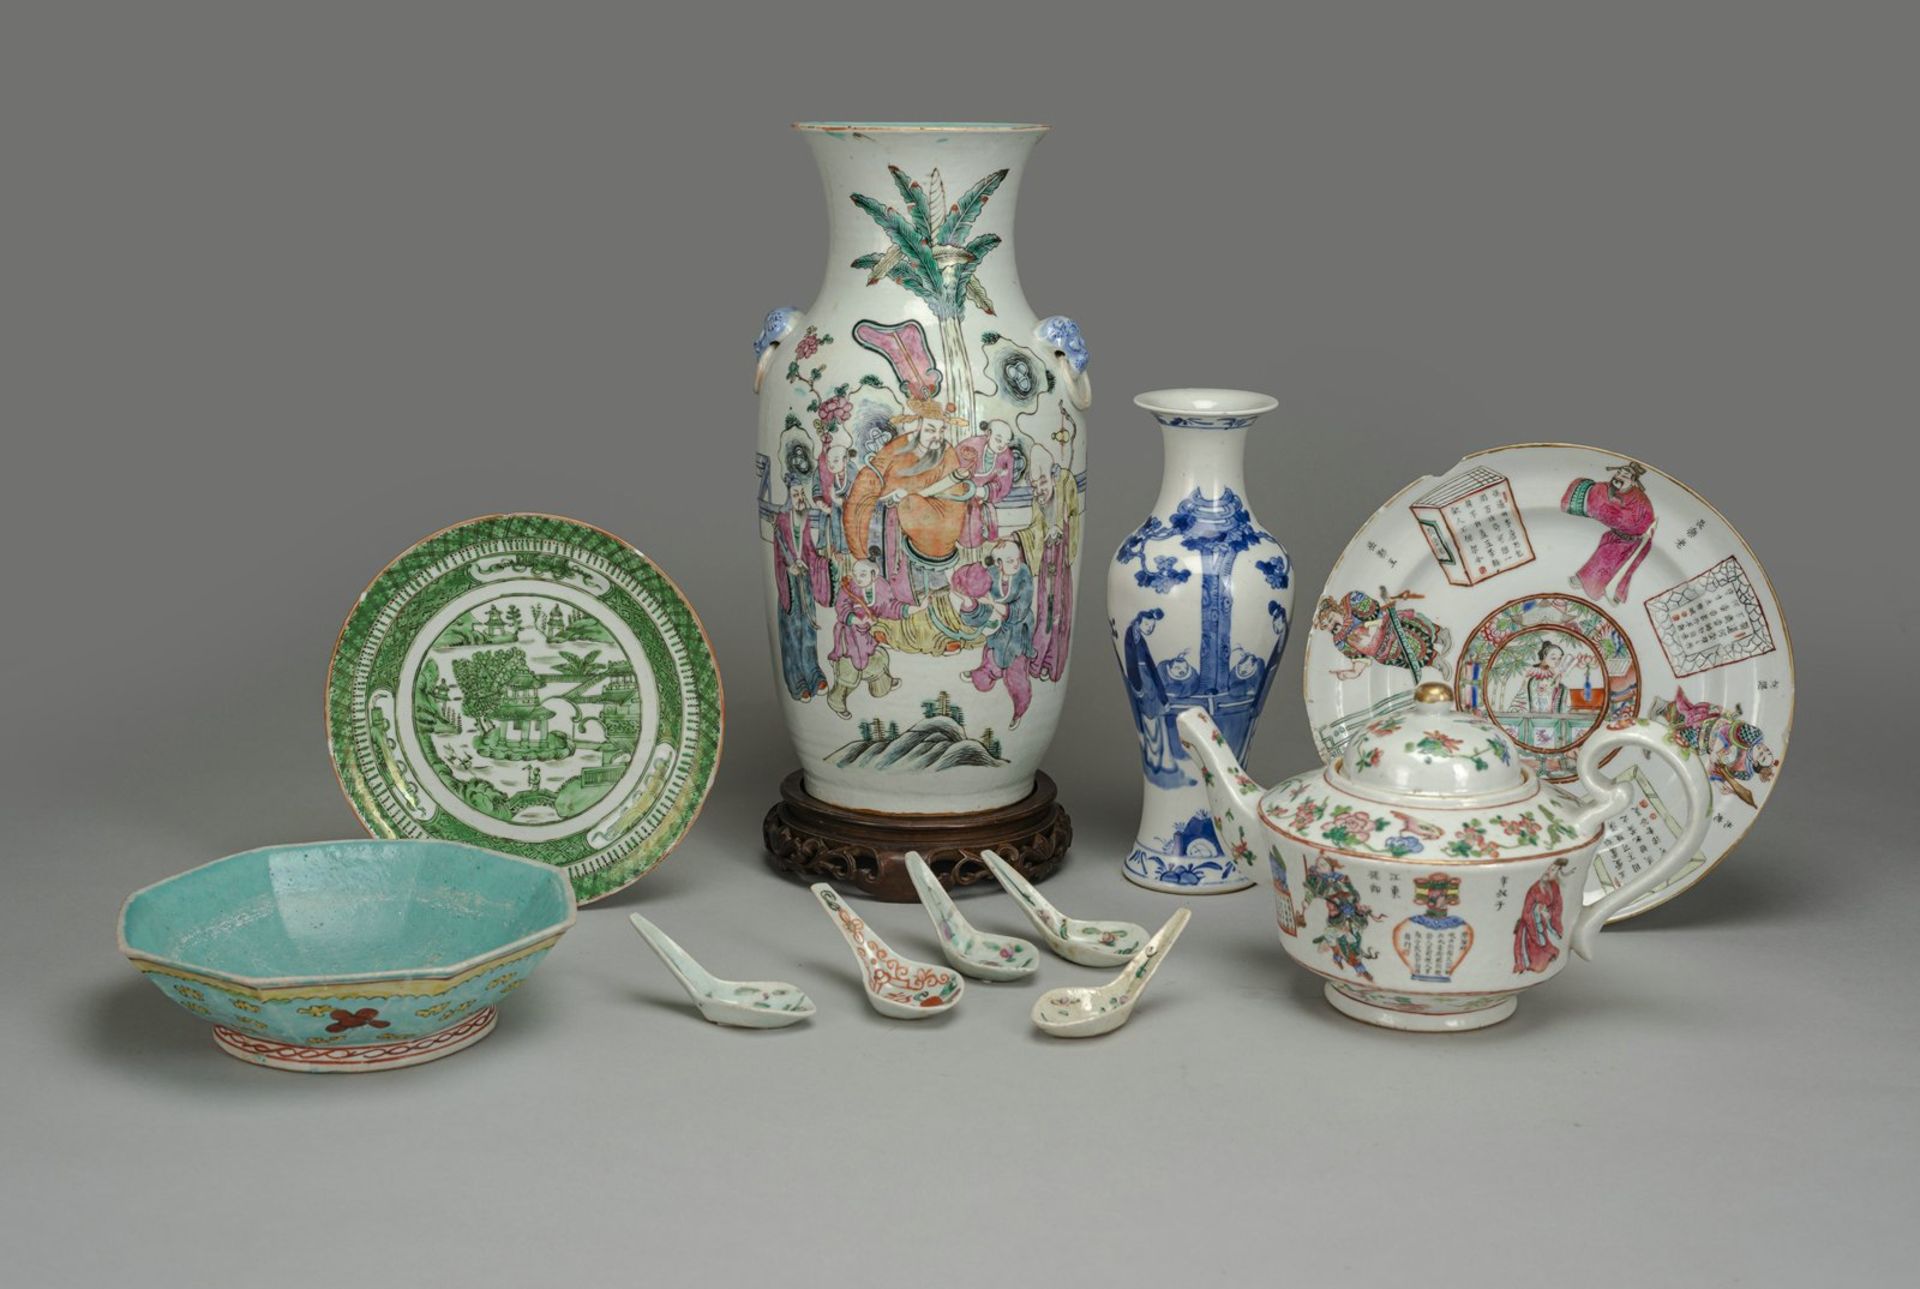 A GROUP OF 11 PORCELAIN PIECES, VASES, SPOONS AND OTHERS